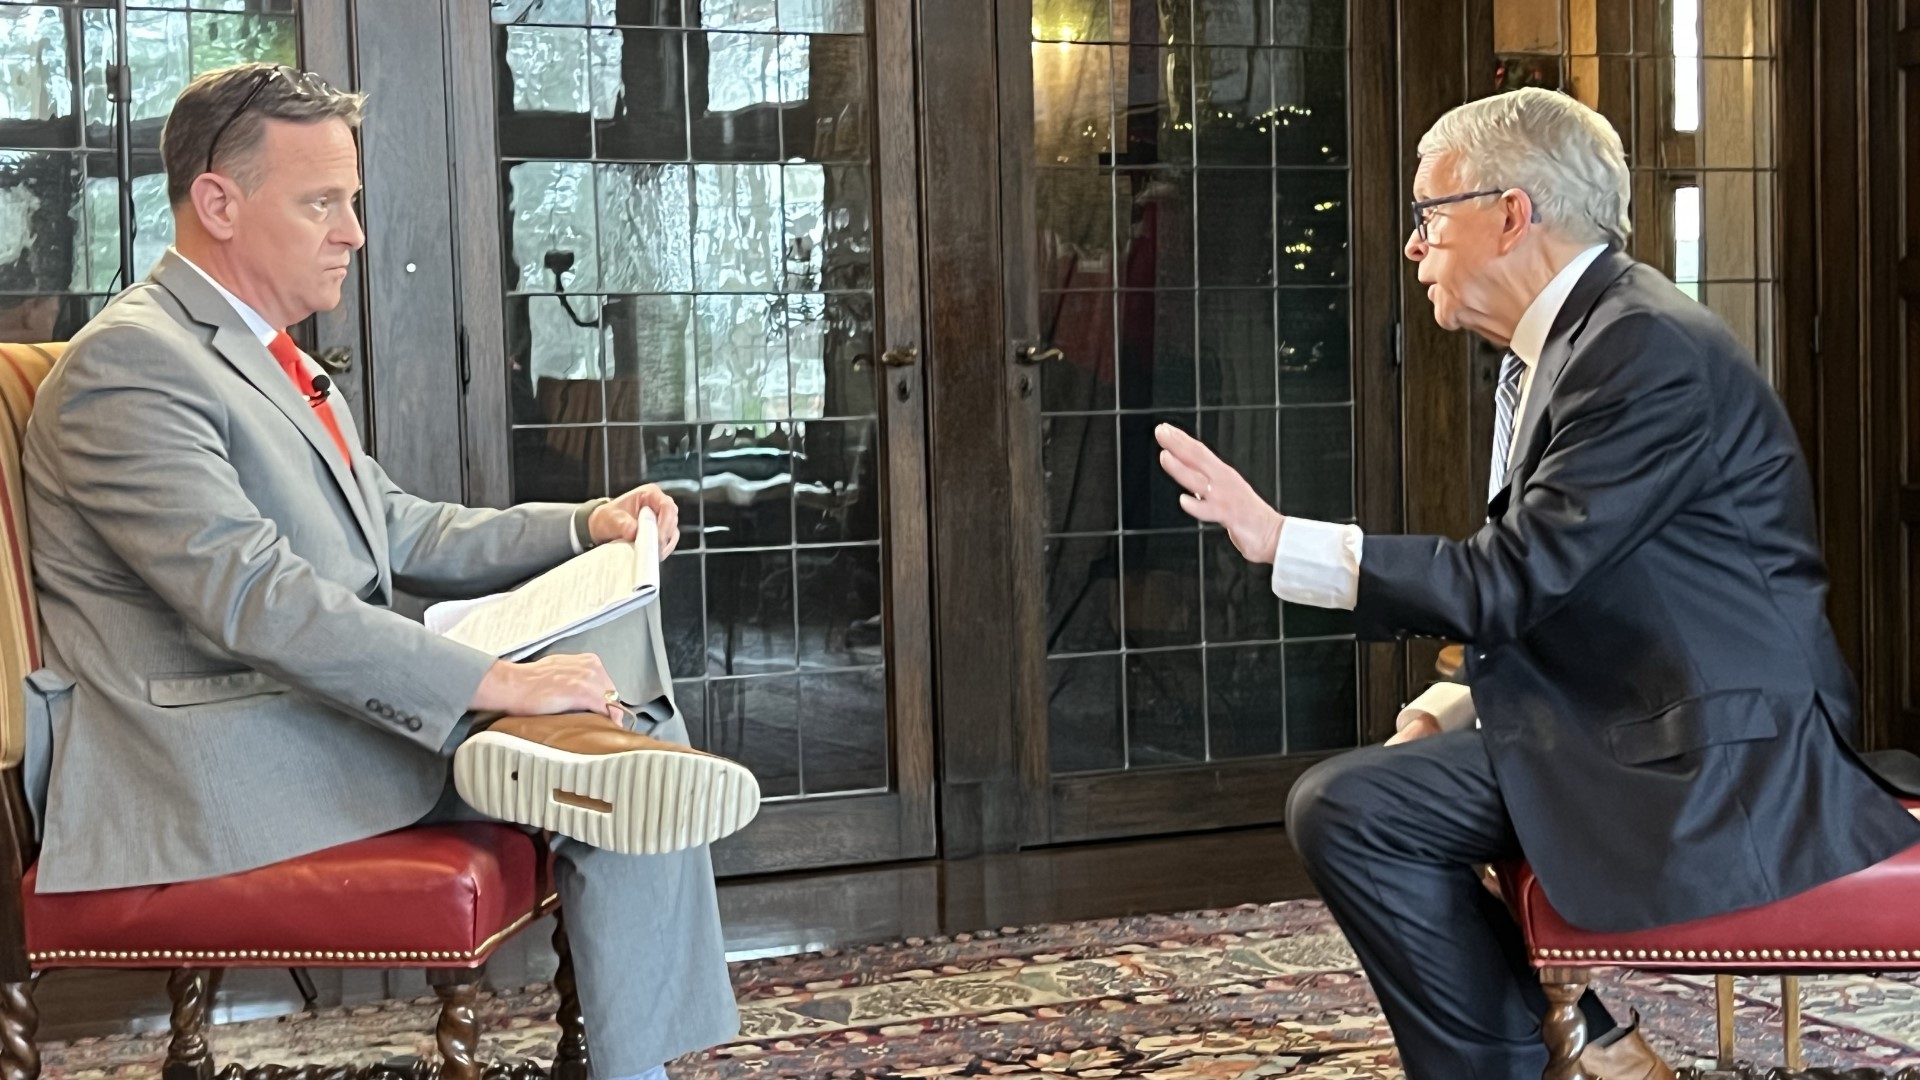 WTOL 11's Jeff Smith sits down with the Ohio governor to talk transportation, education, crime, economy and more in 2023, and discuss plans for the state in 2024.